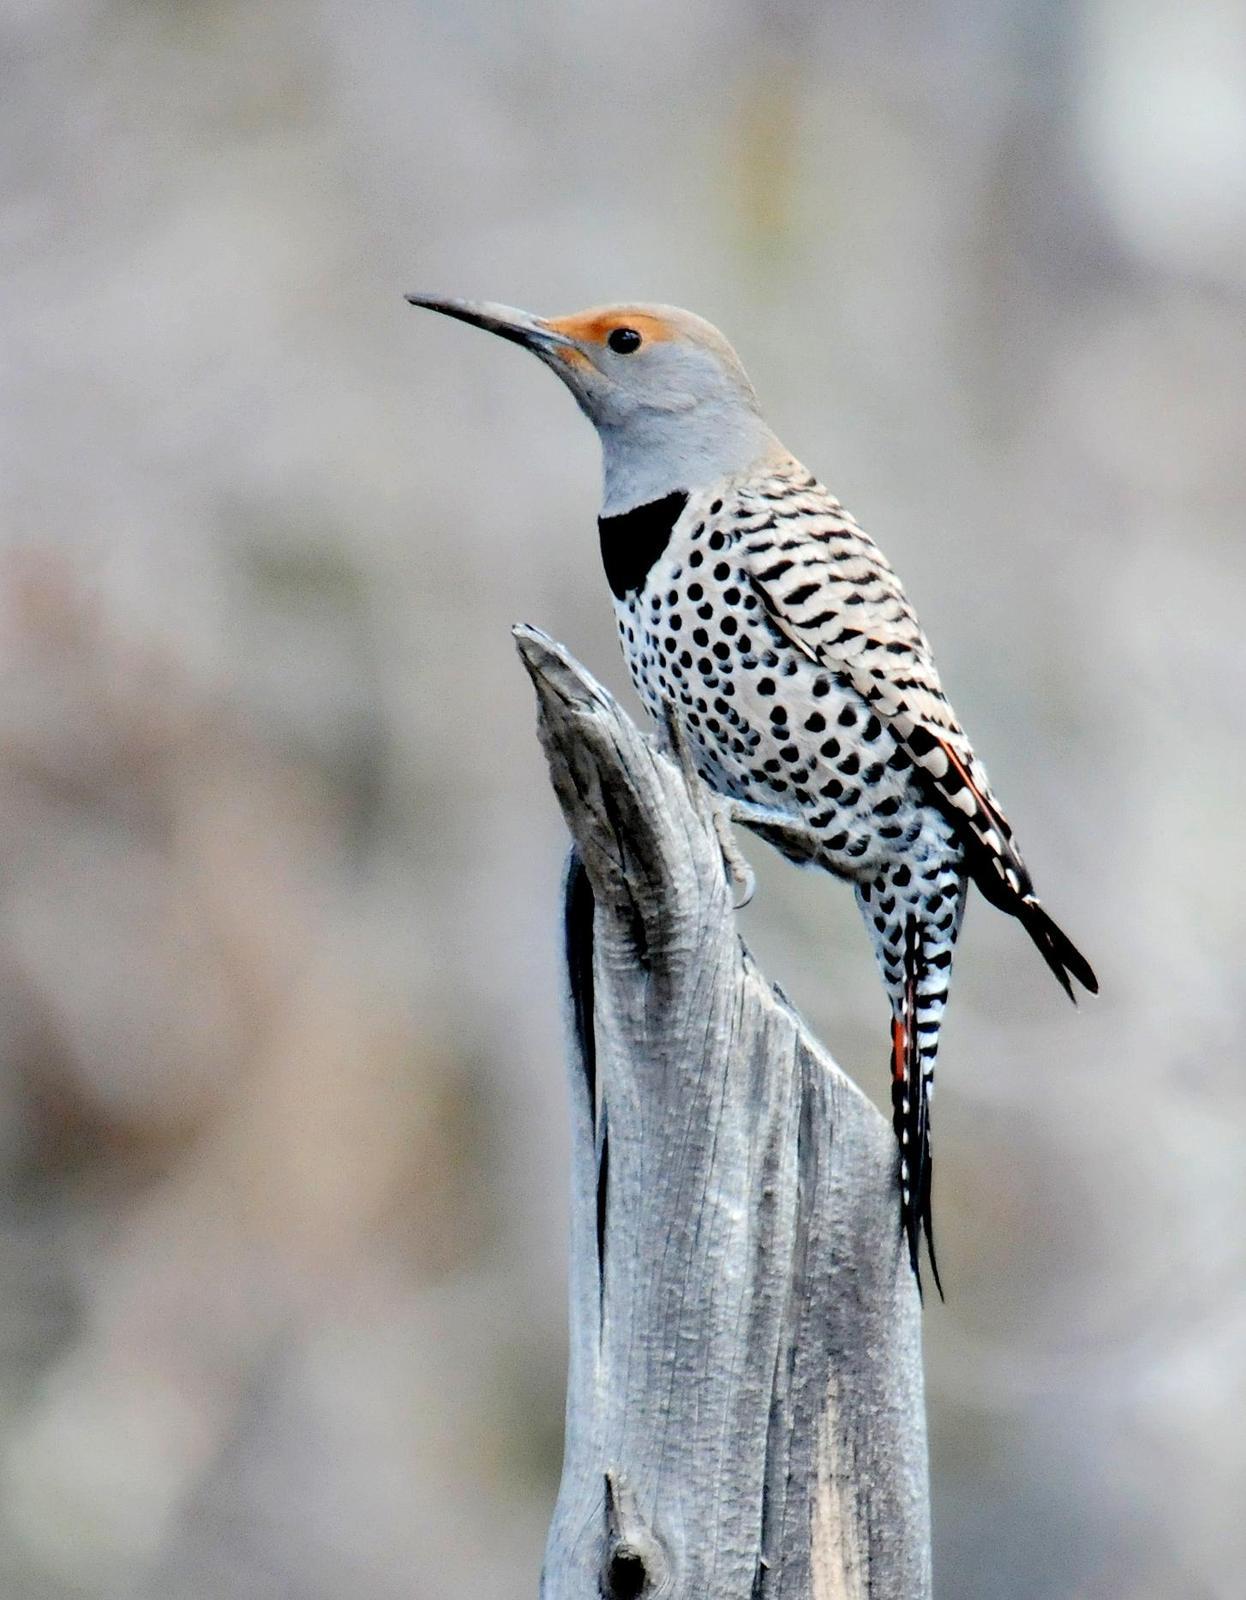 Northern Flicker (Red-shafted) Photo by Steven Mlodinow